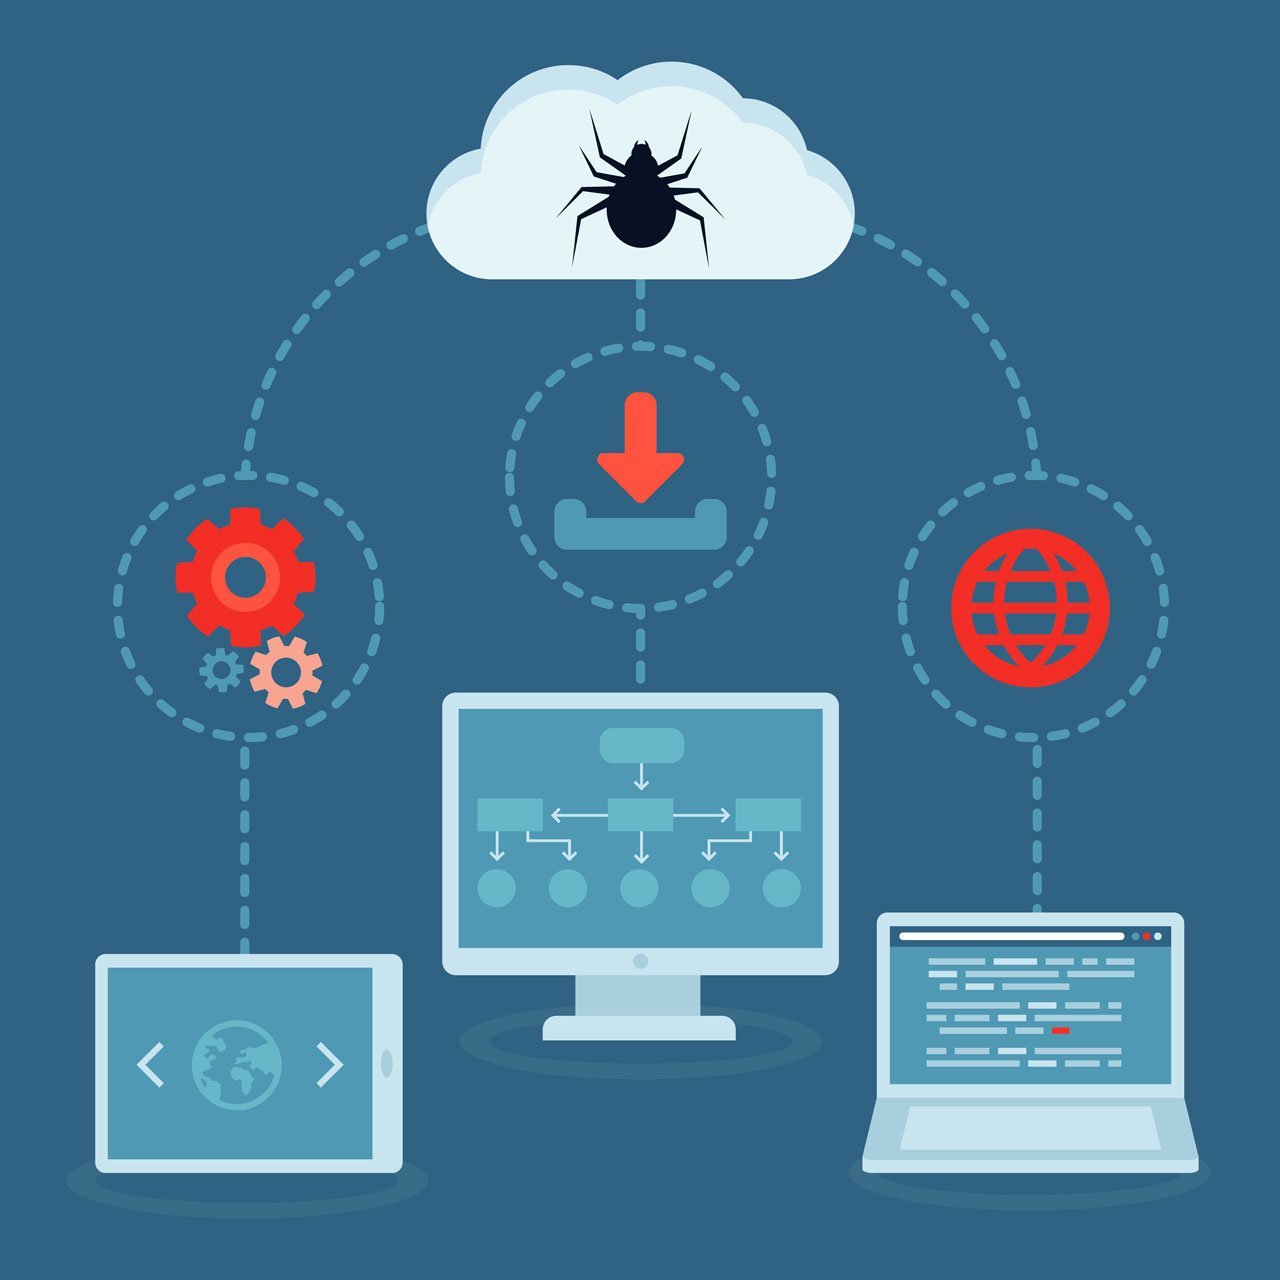 What Are The Different Kinds of Malware?